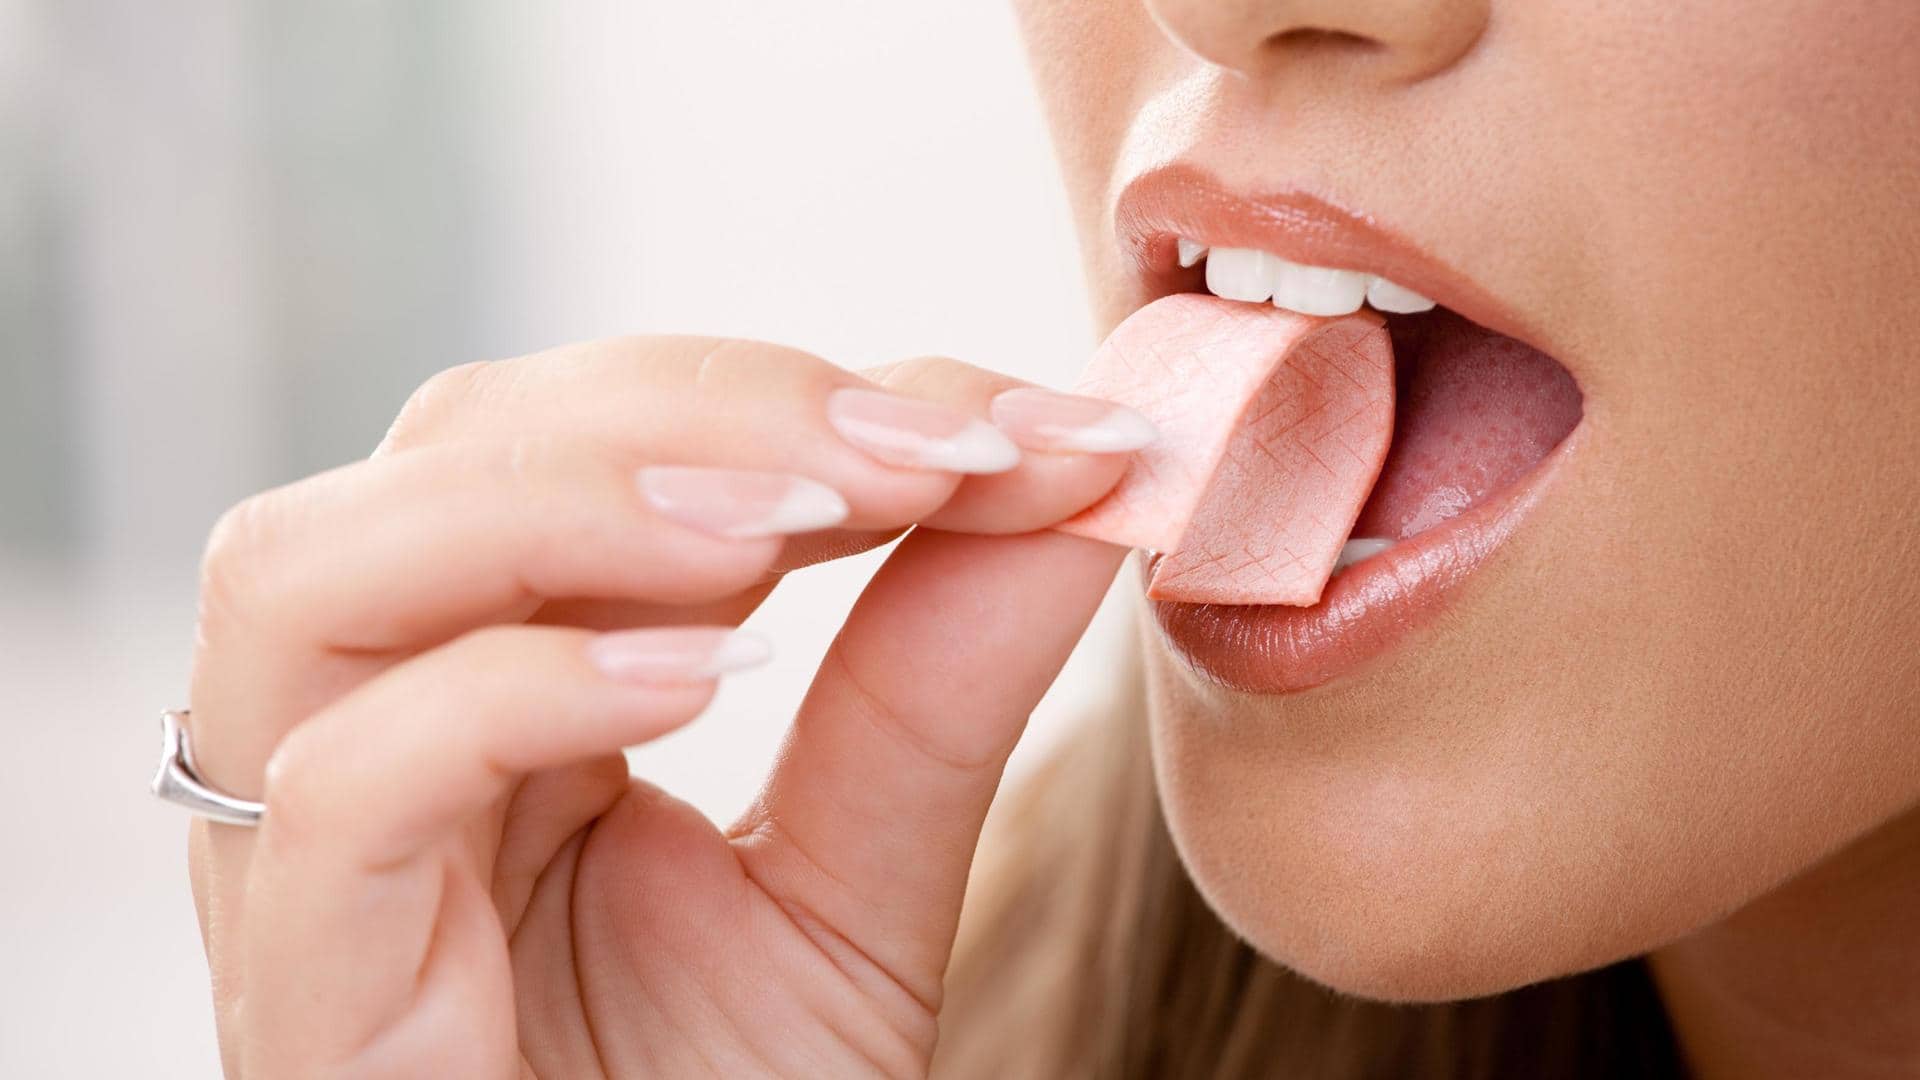 Chewing gum is healthy. Even science says so! Here's how